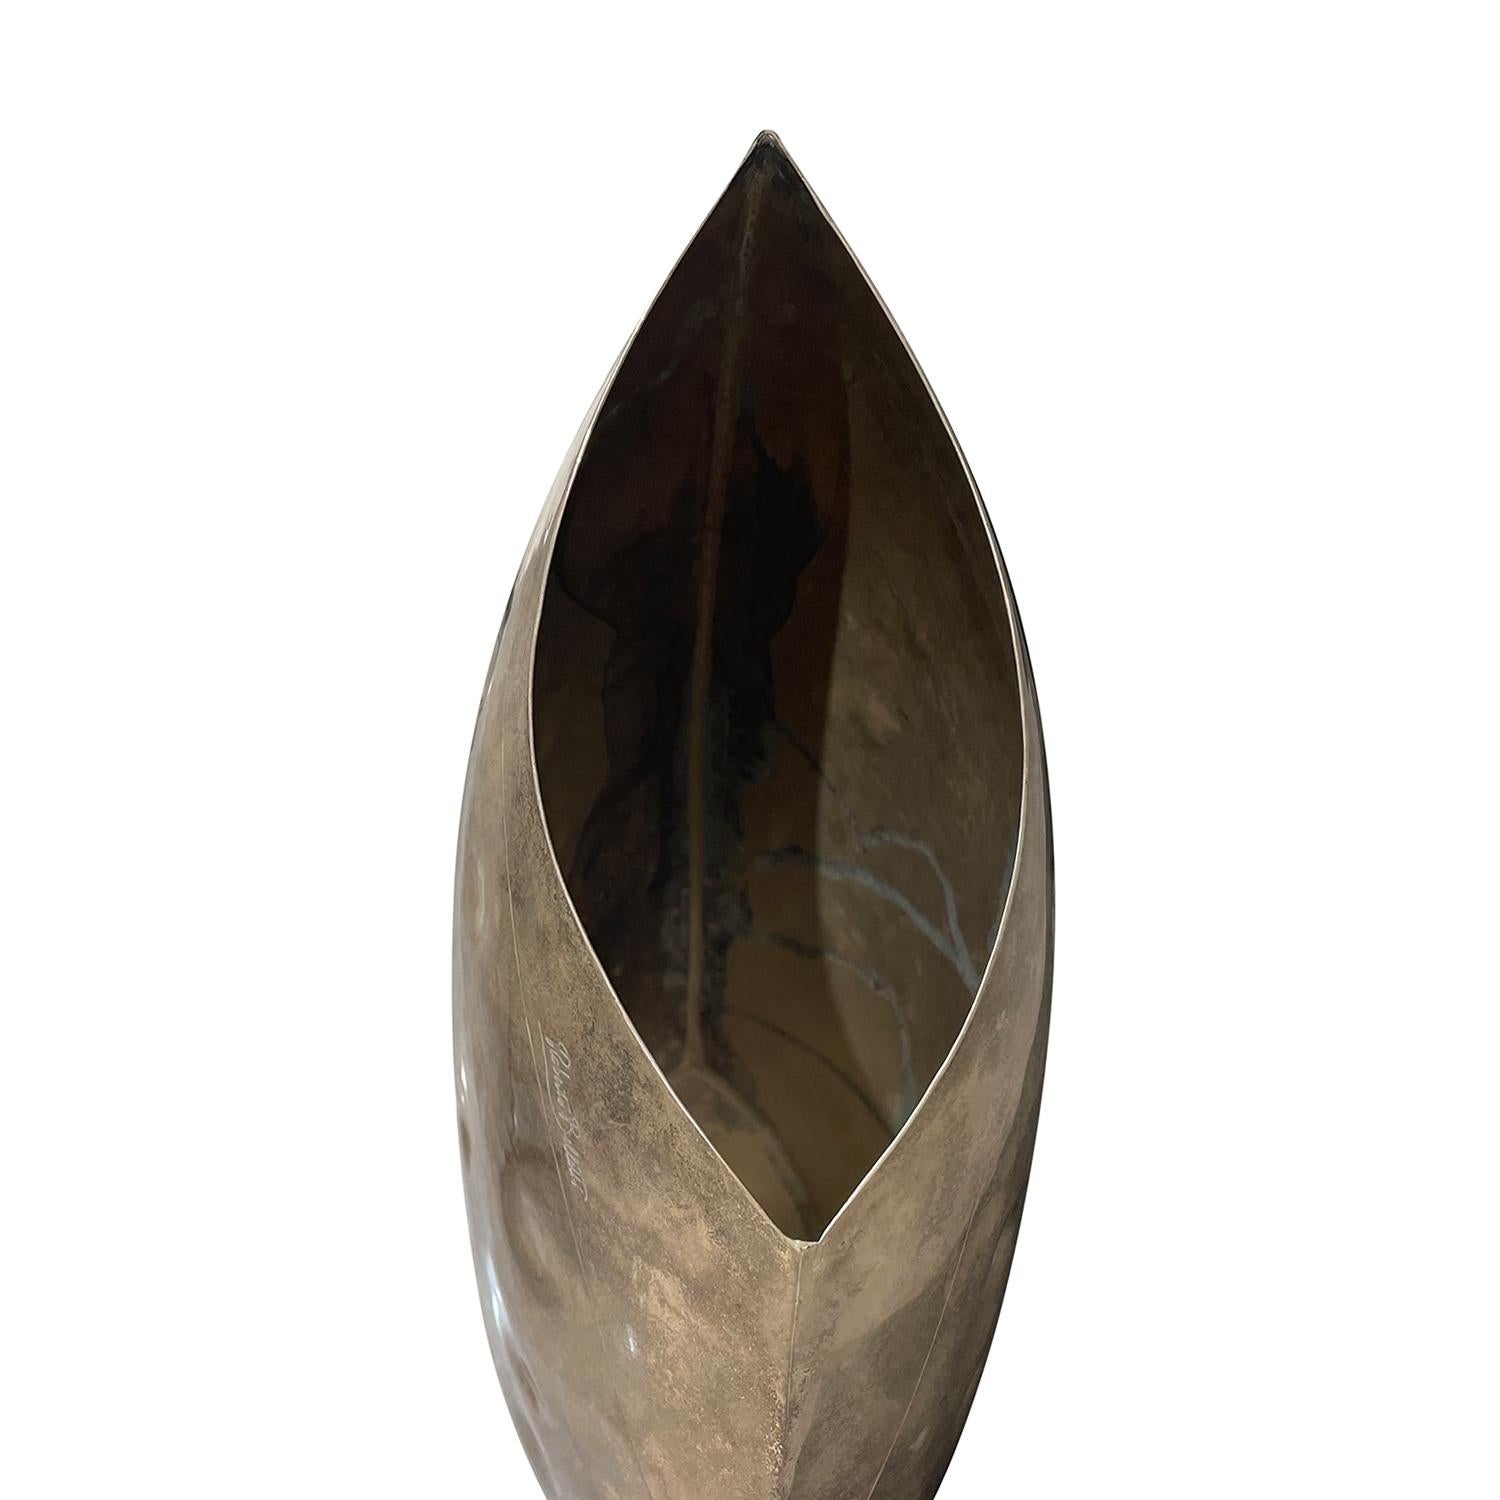 Contemporary 21st Century Italian Silver-Plated Metal Sculptural Vase by Roberto Bellitti